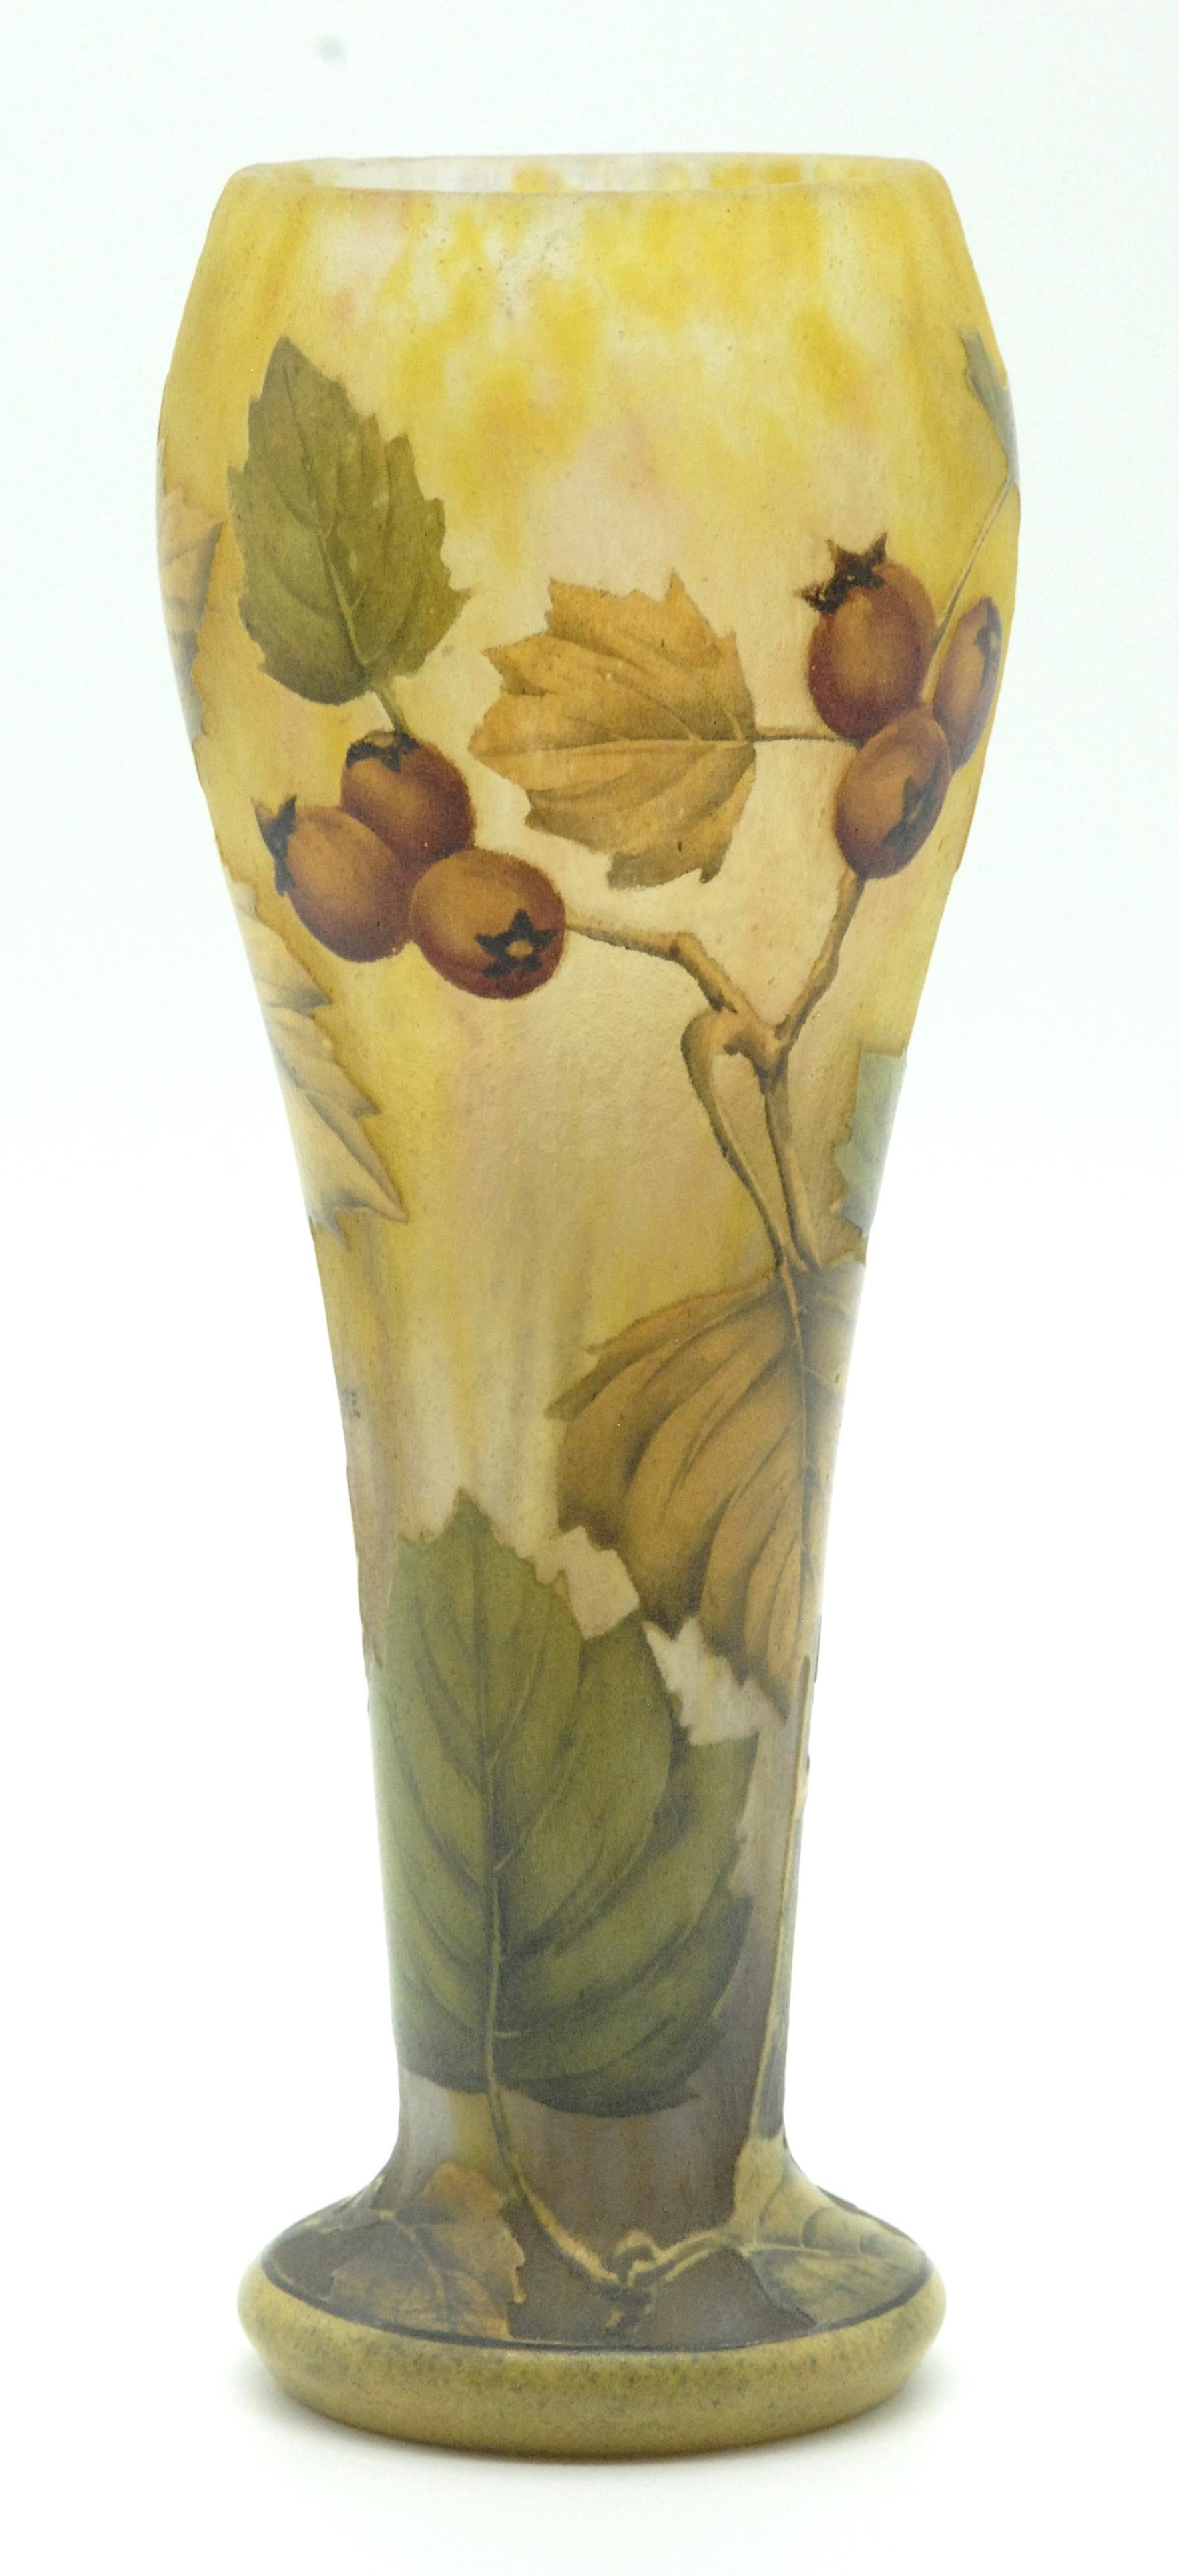 Rose hips and leaves feature on this rare cameo art glass vase by the renowned French glass making firm of Daum, Nancy. The graceful vessel features an etched and colored rose stems with leaves and rose hips residing upon a sunset background of